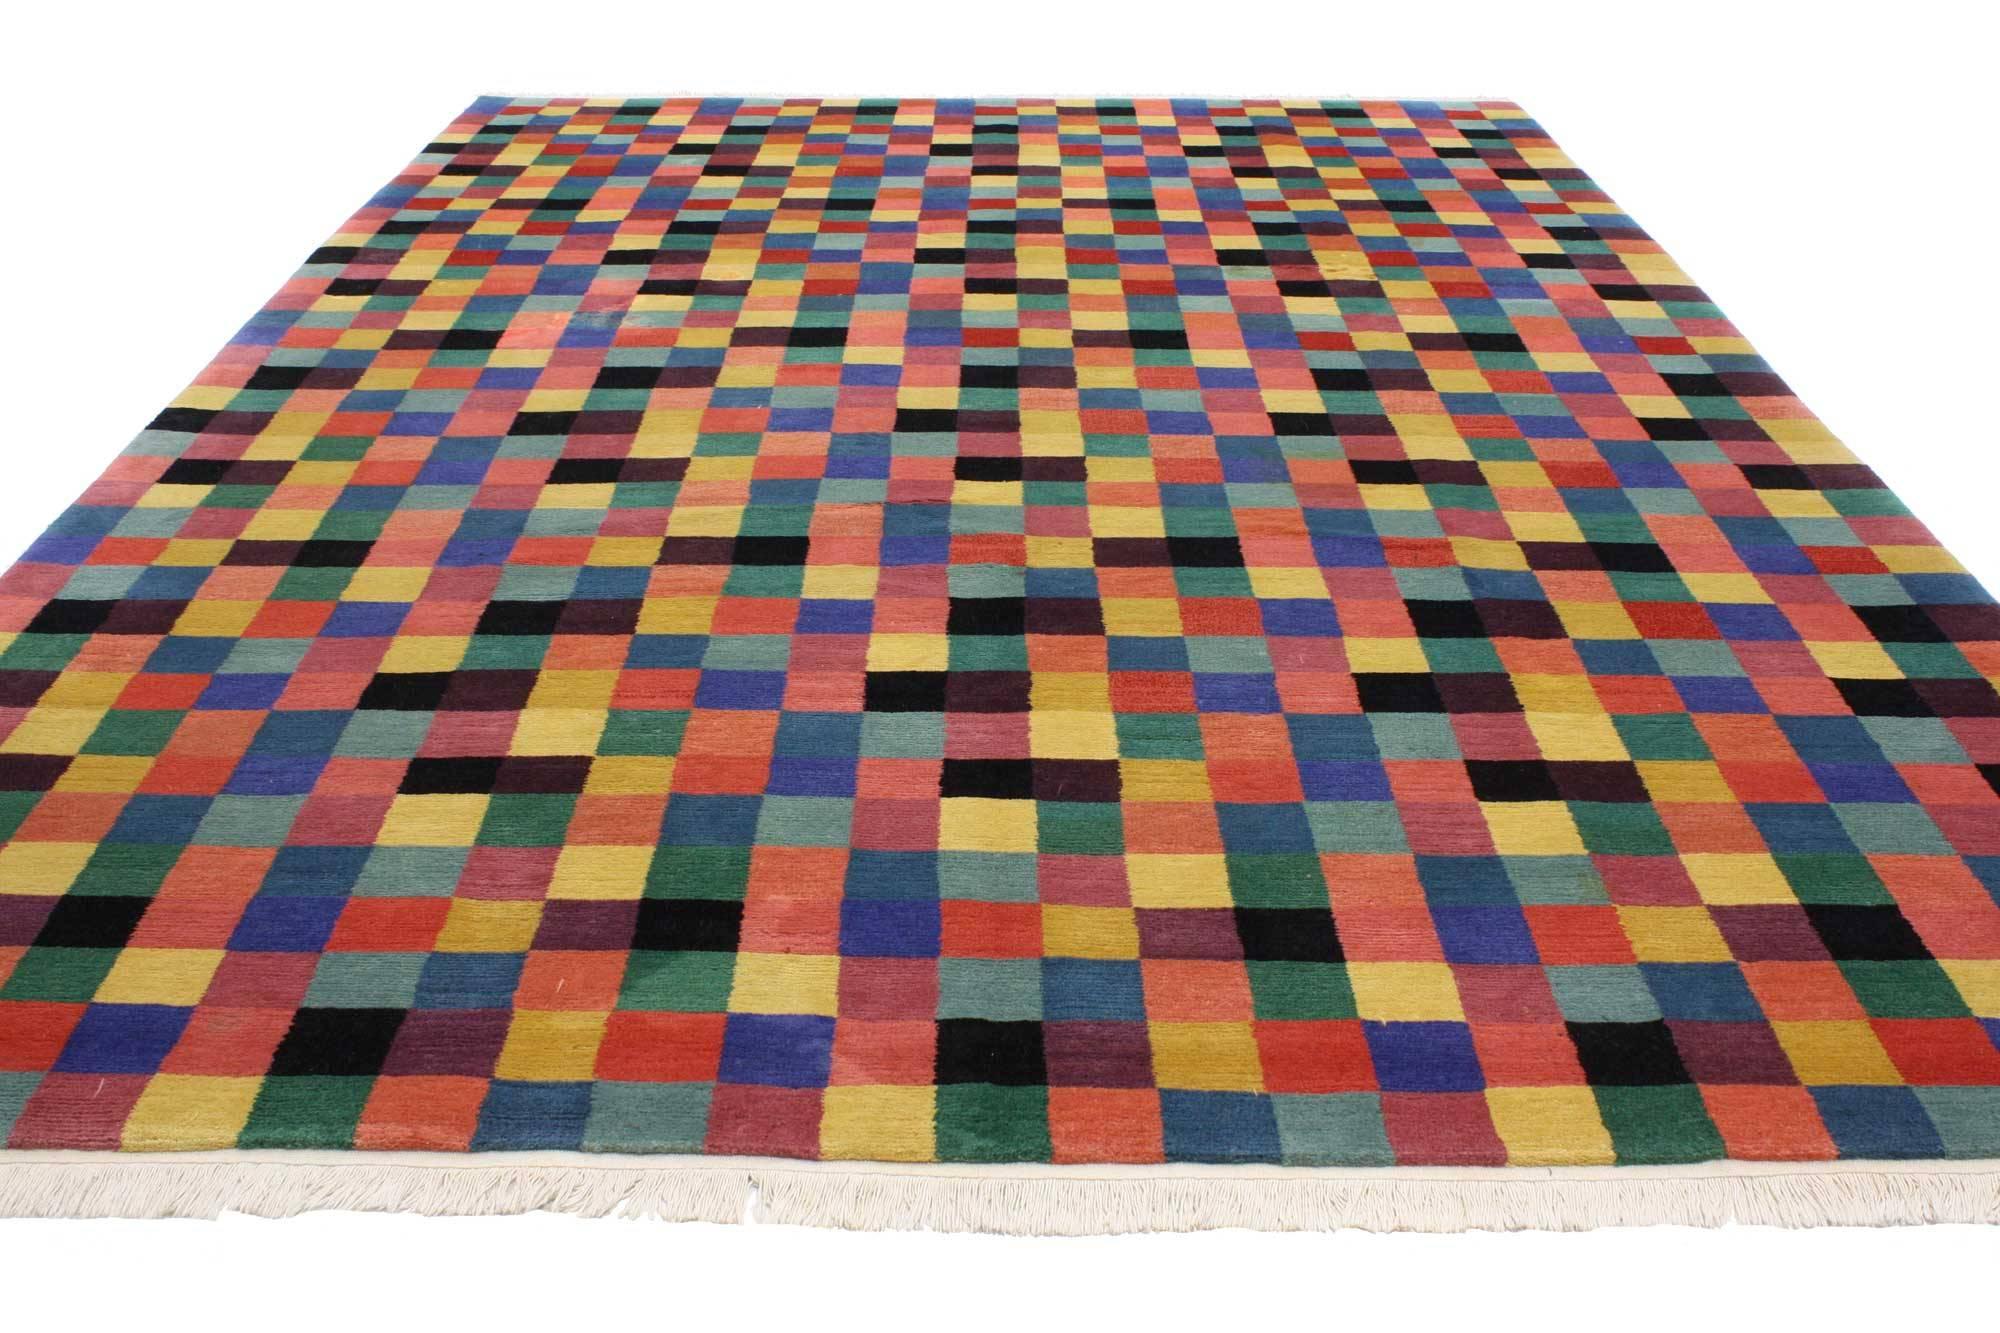 76815, vintage modern area rug with Cubism style after Douglas Coupland. Bright and dynamic, this vintage modern area rug features a multi-color checkerboard in the fashion of Cubism. Like a burst of confetti or the interlocking shapes of a game of